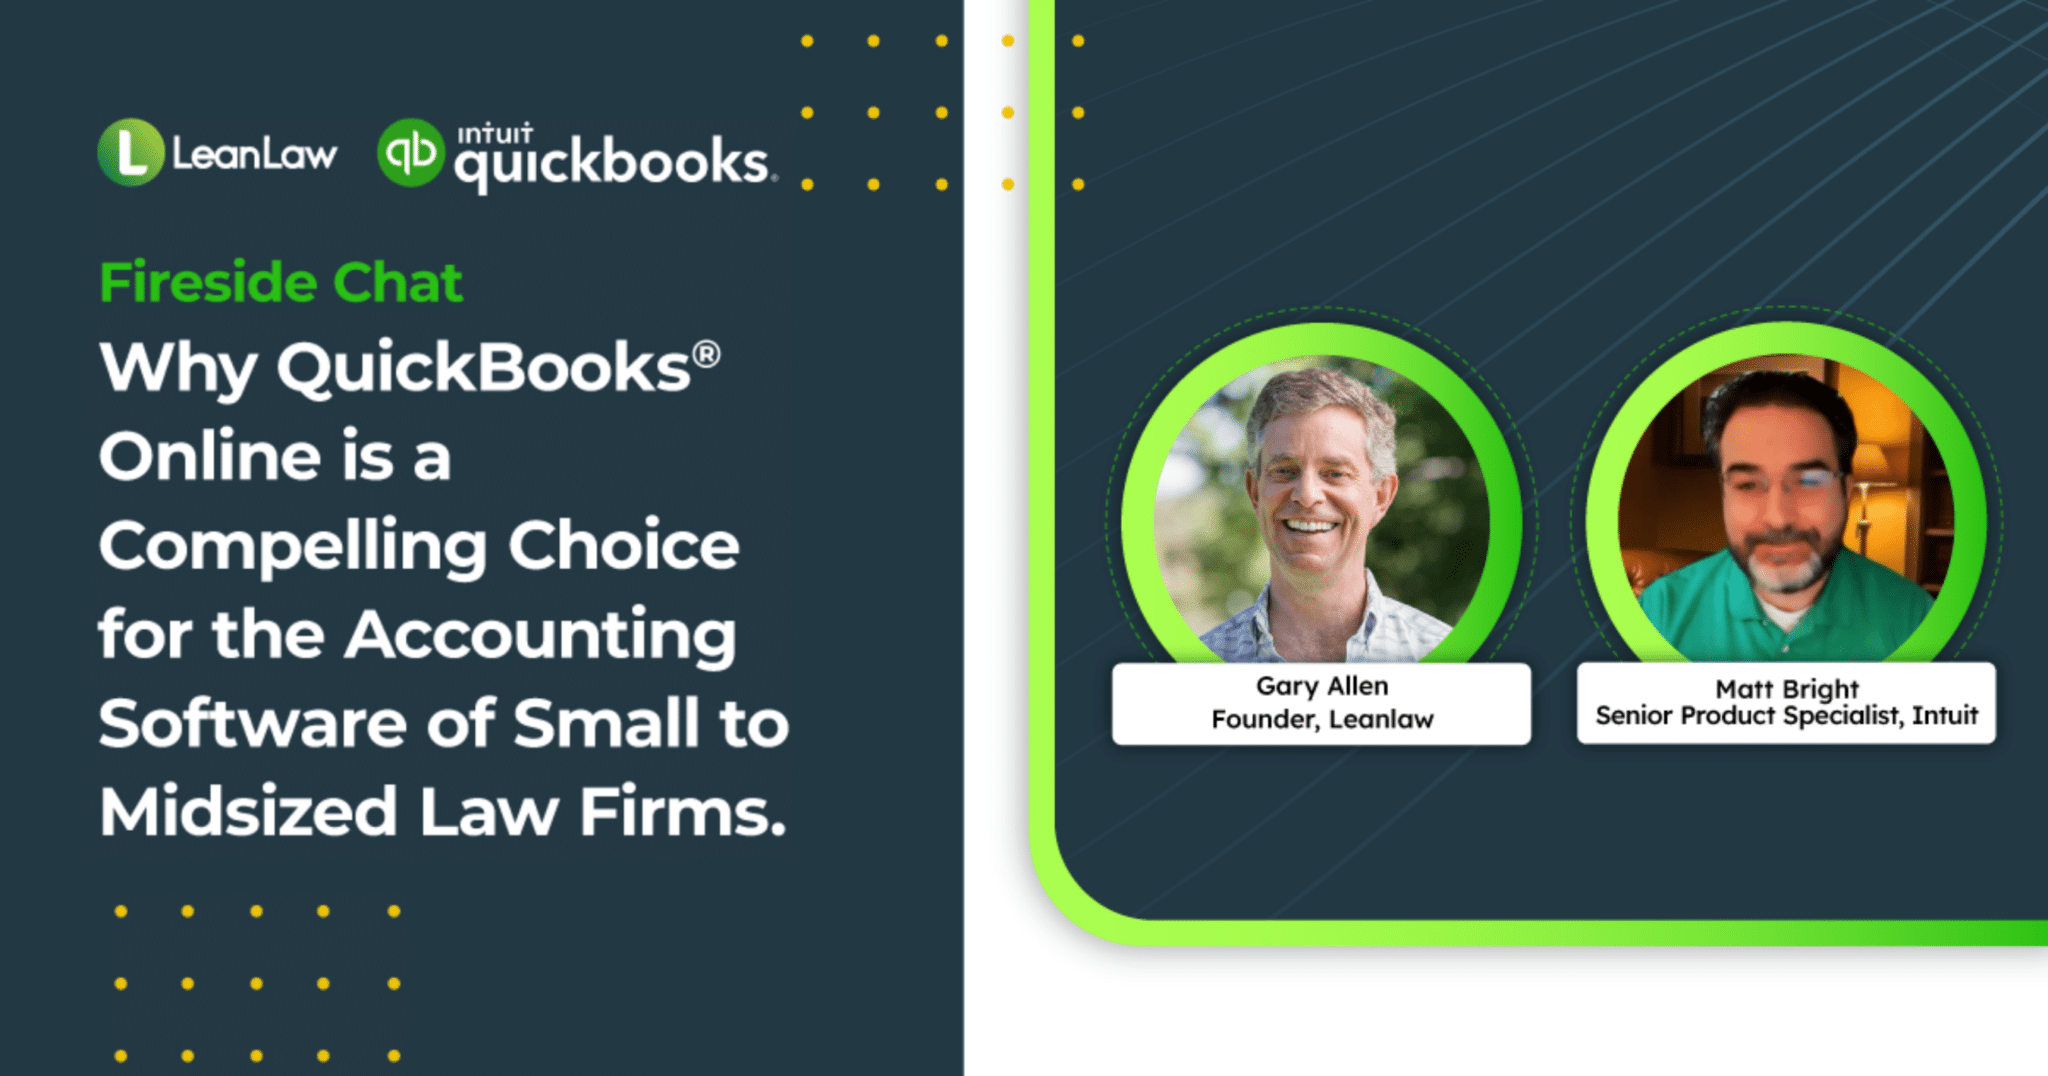 Why QuickBooks® Online is a Compelling Choice for the Accounting Software of Small to Midsized Law Firms.